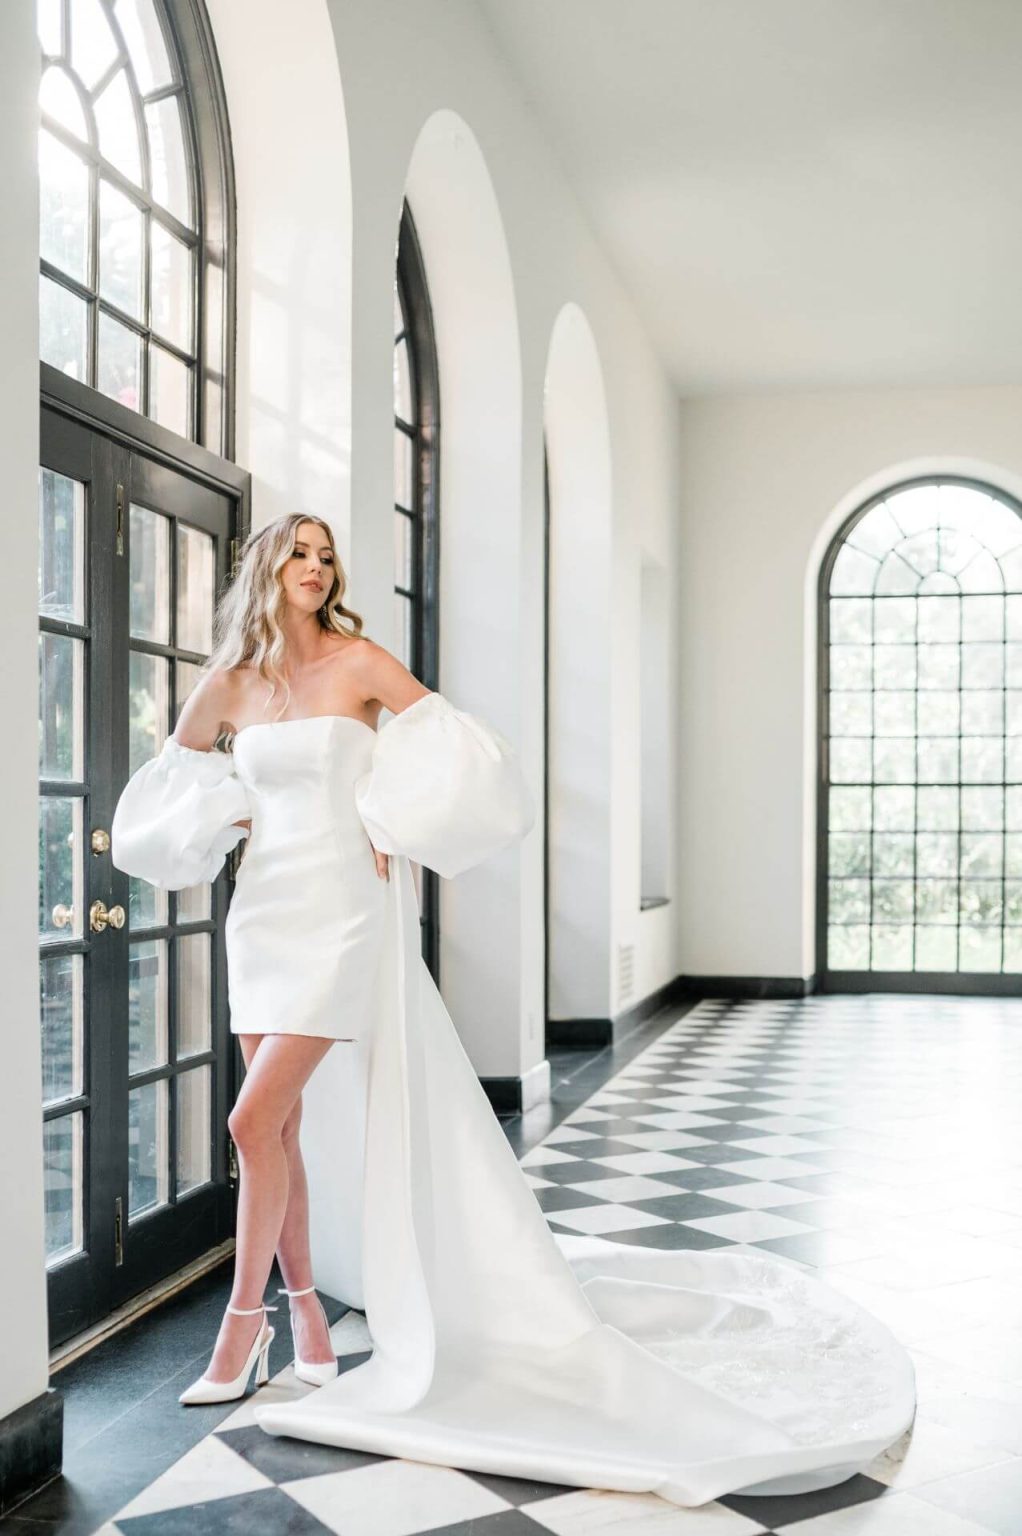 ️ 4 Essential Considerations When Choosing Your Perfect Wedding Dress